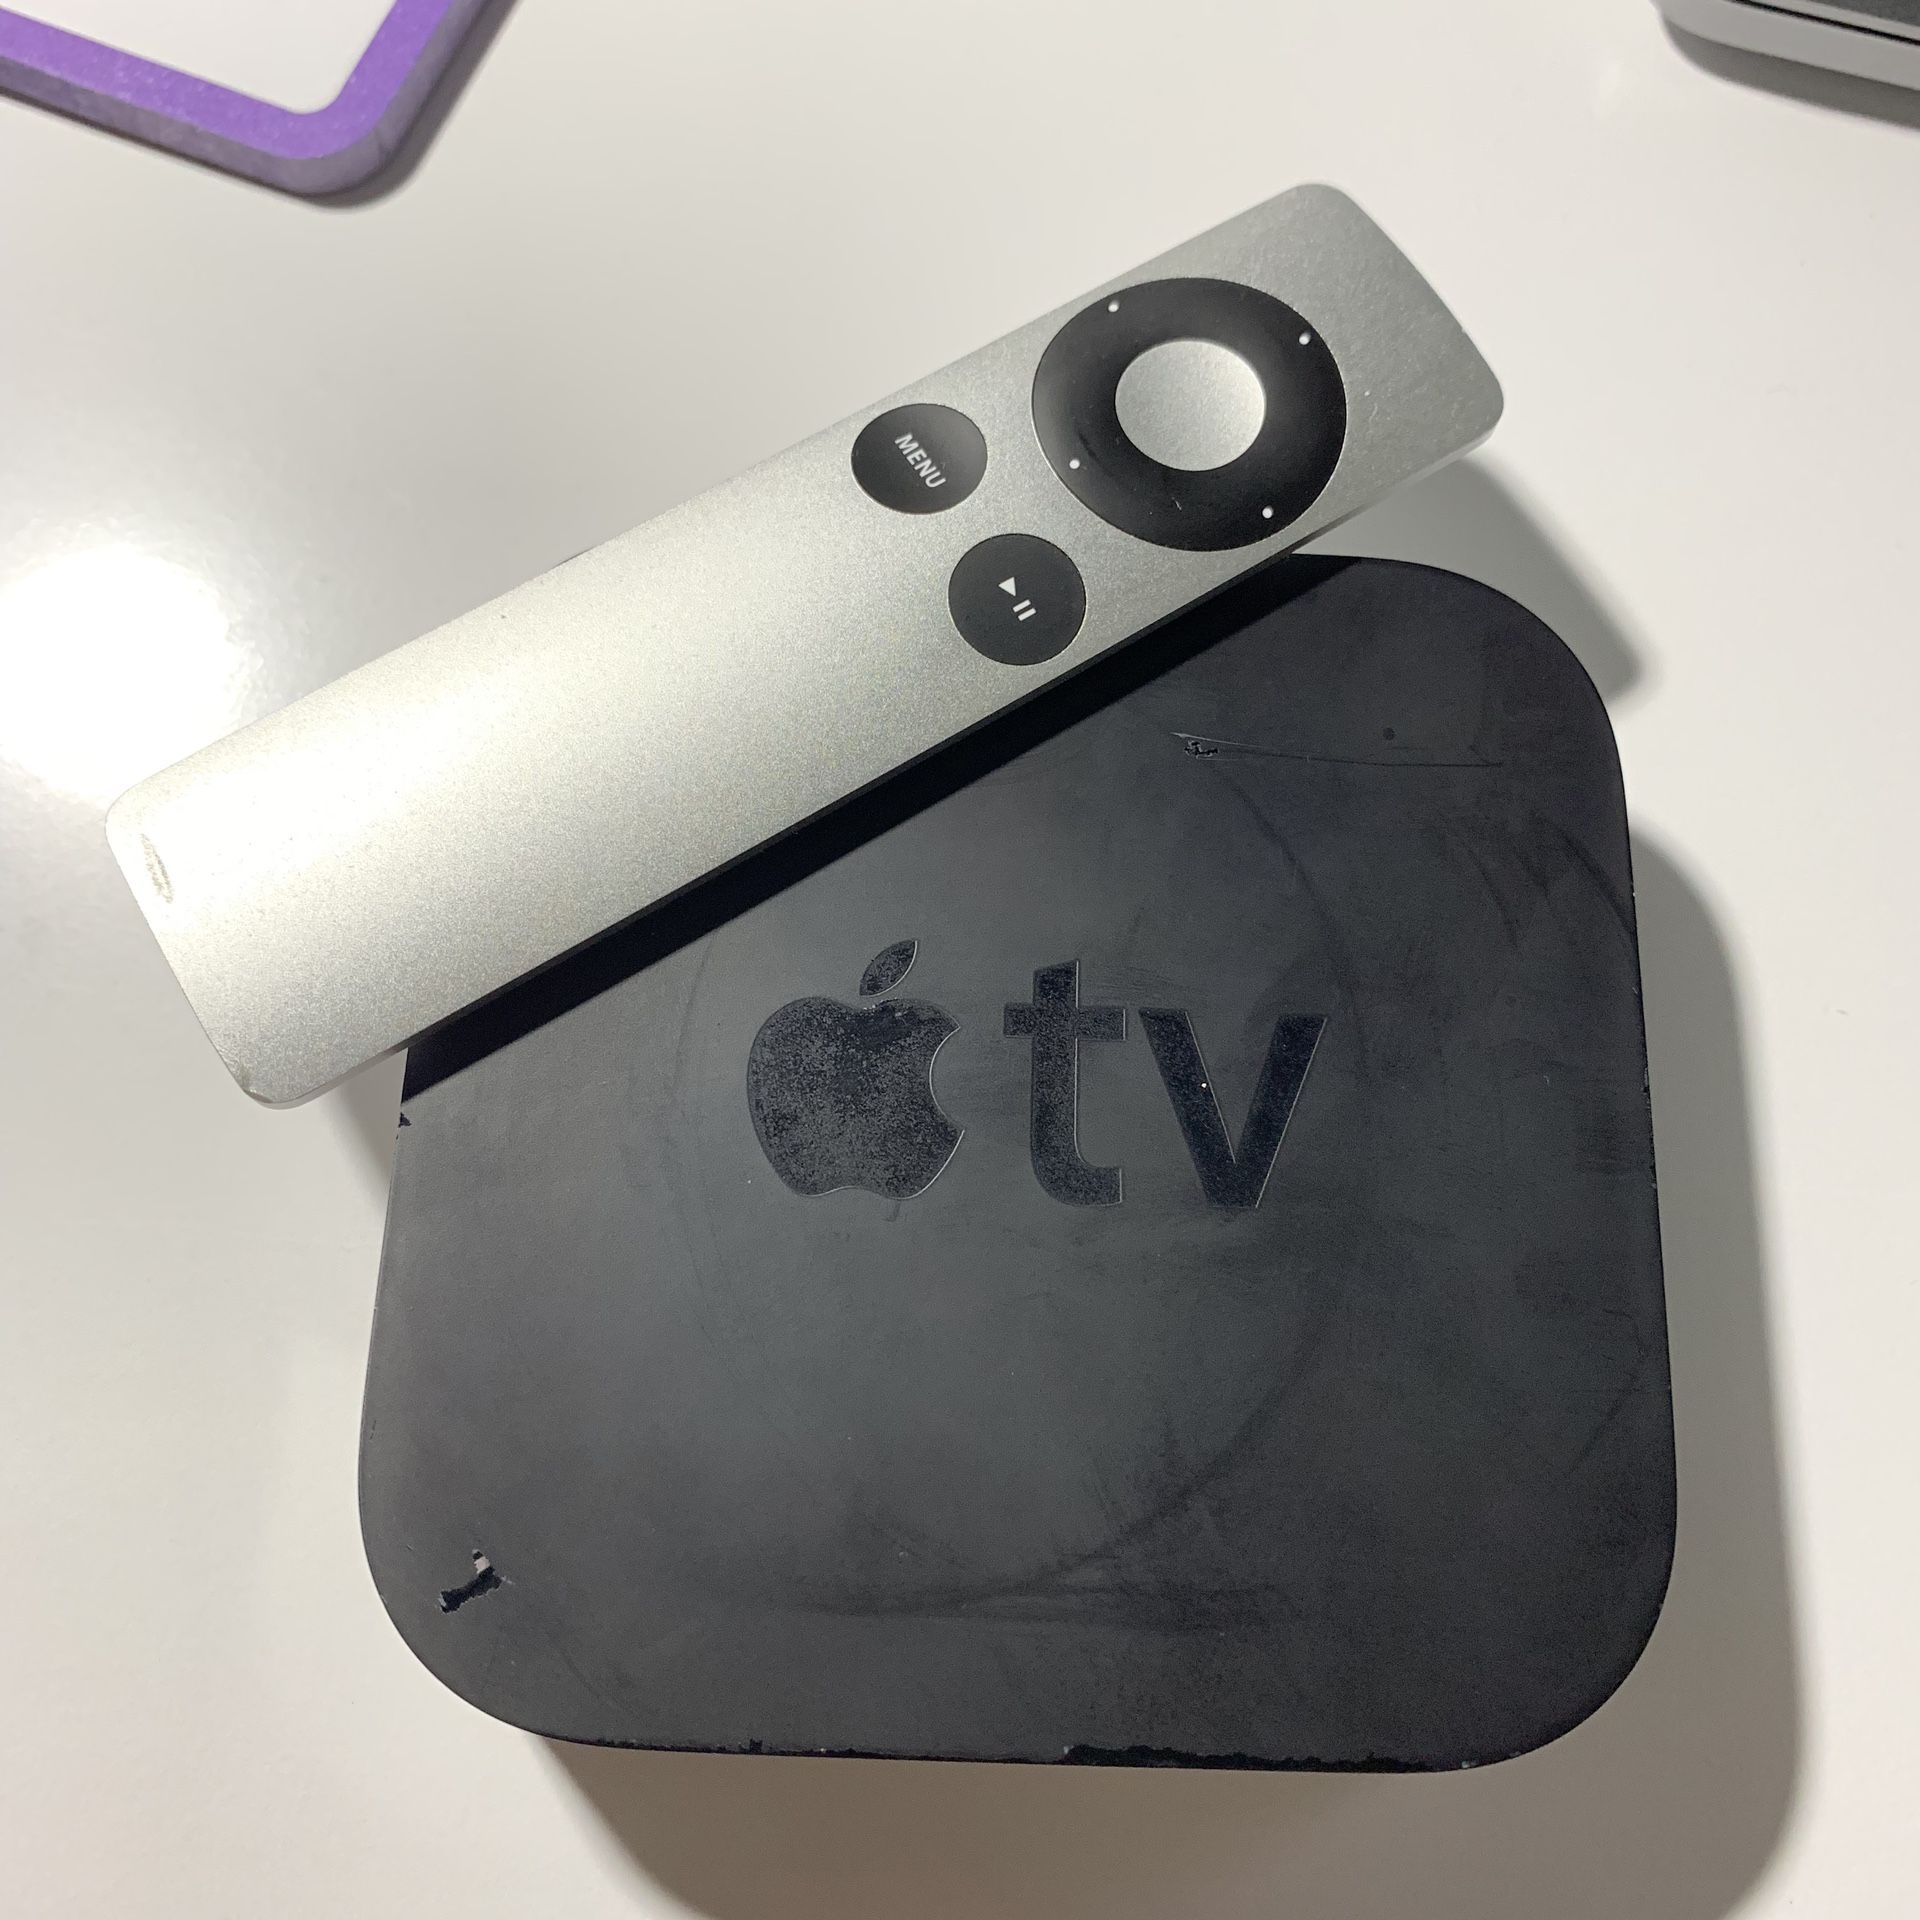 Apple TV 1st generation (Used Normal)